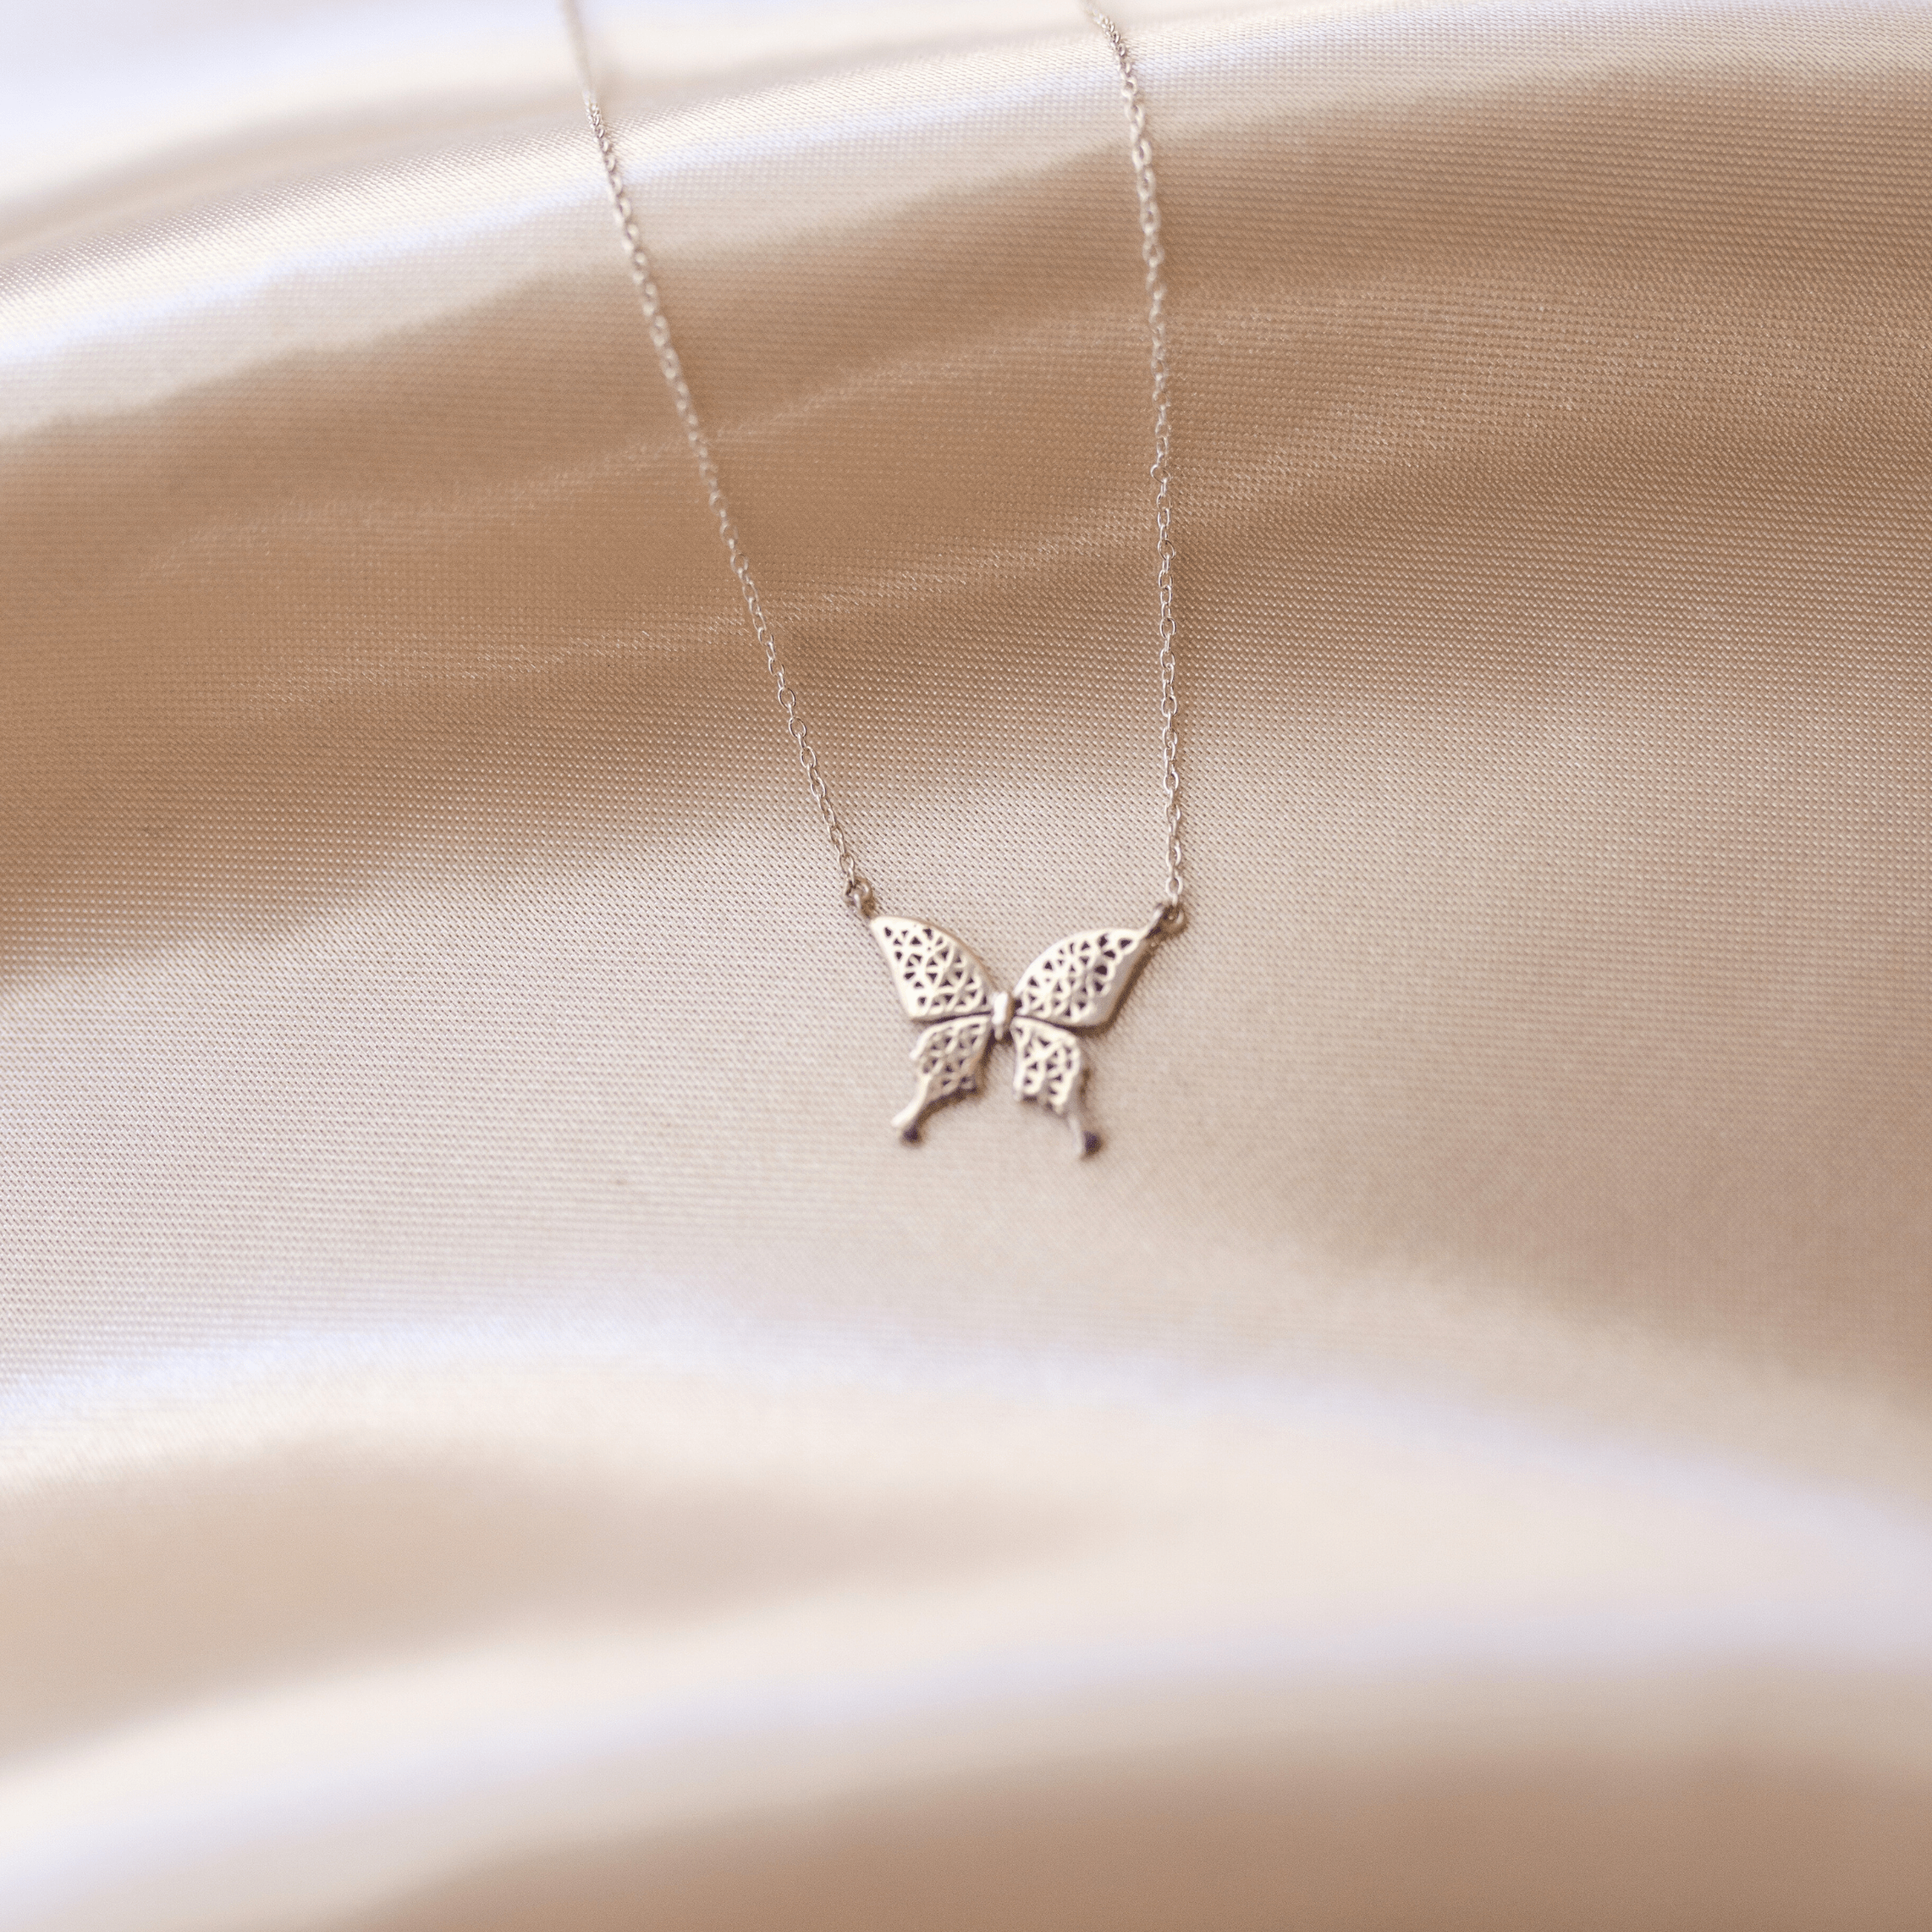 Jewelry Evolution Necklace Flower of Life "Petite" Butterfly Necklace